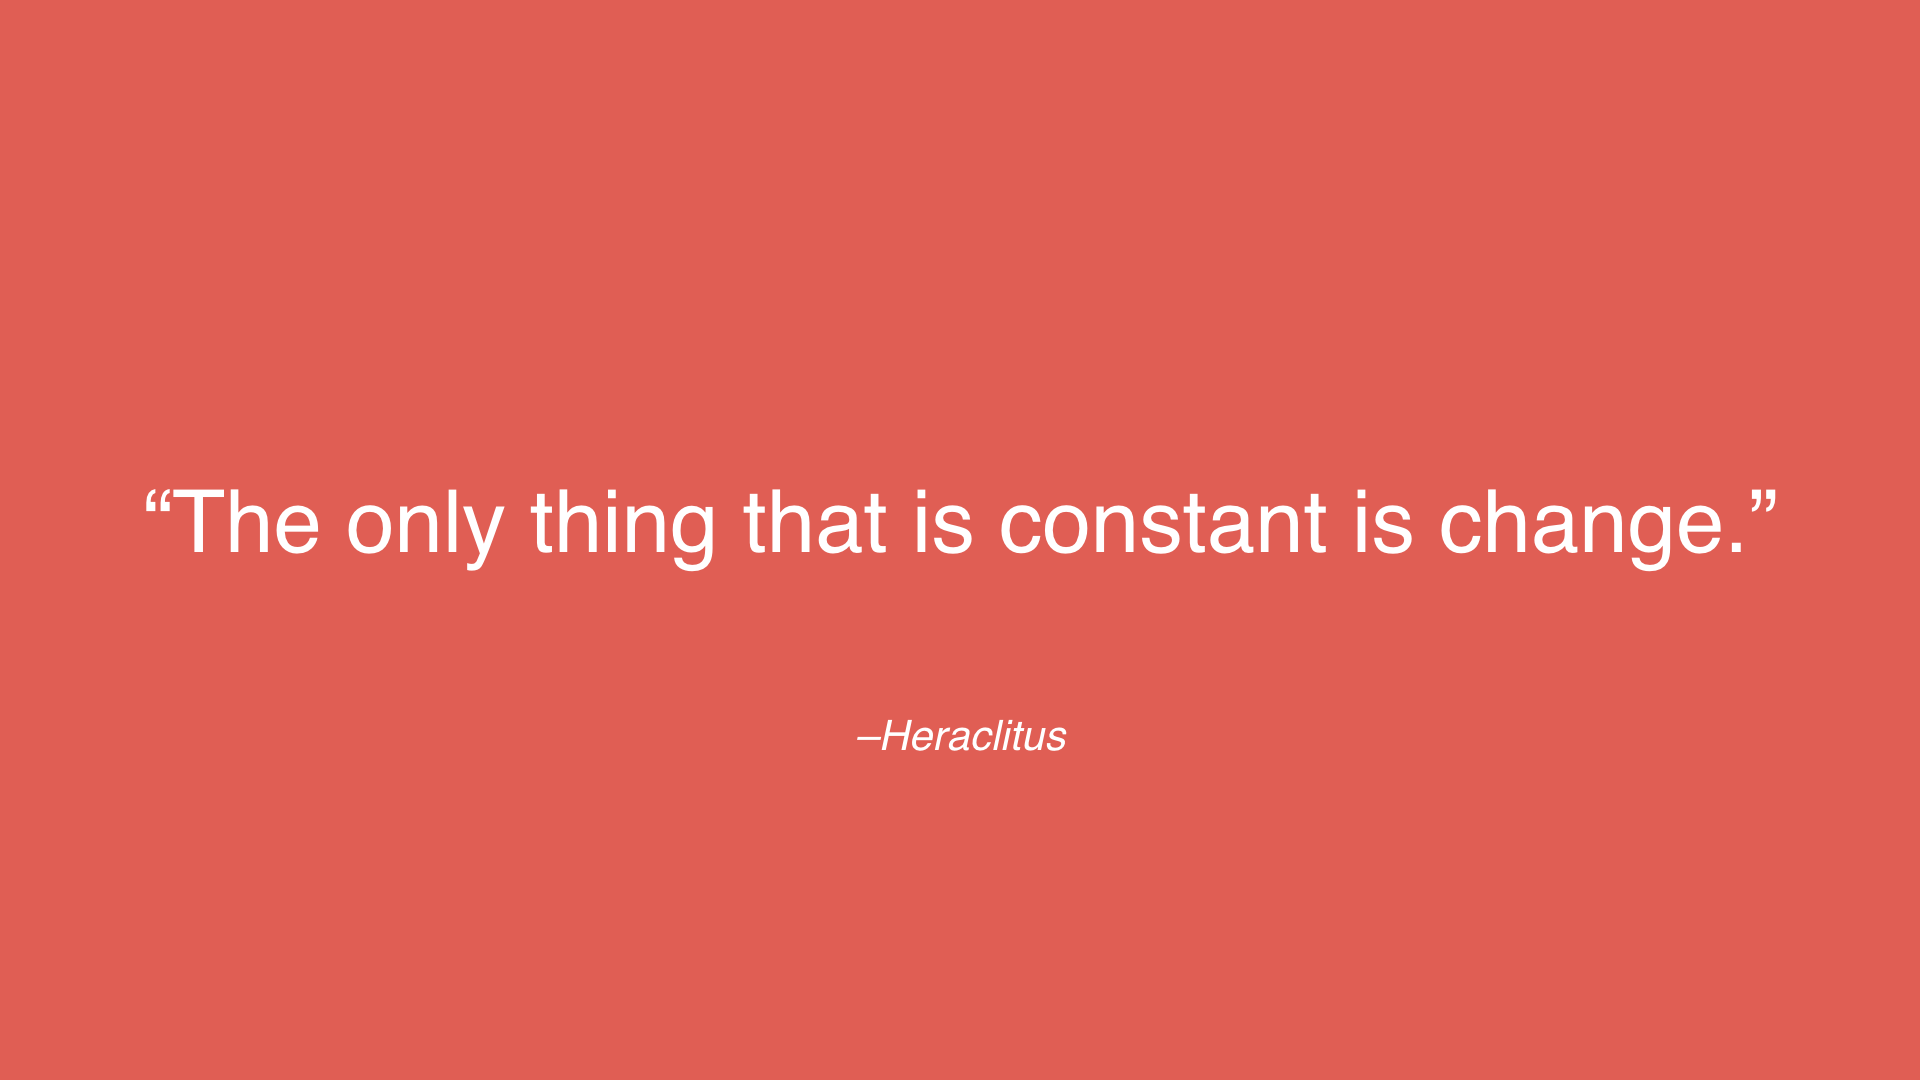 Quote by Heraclitus: The only thing that is constant is change.